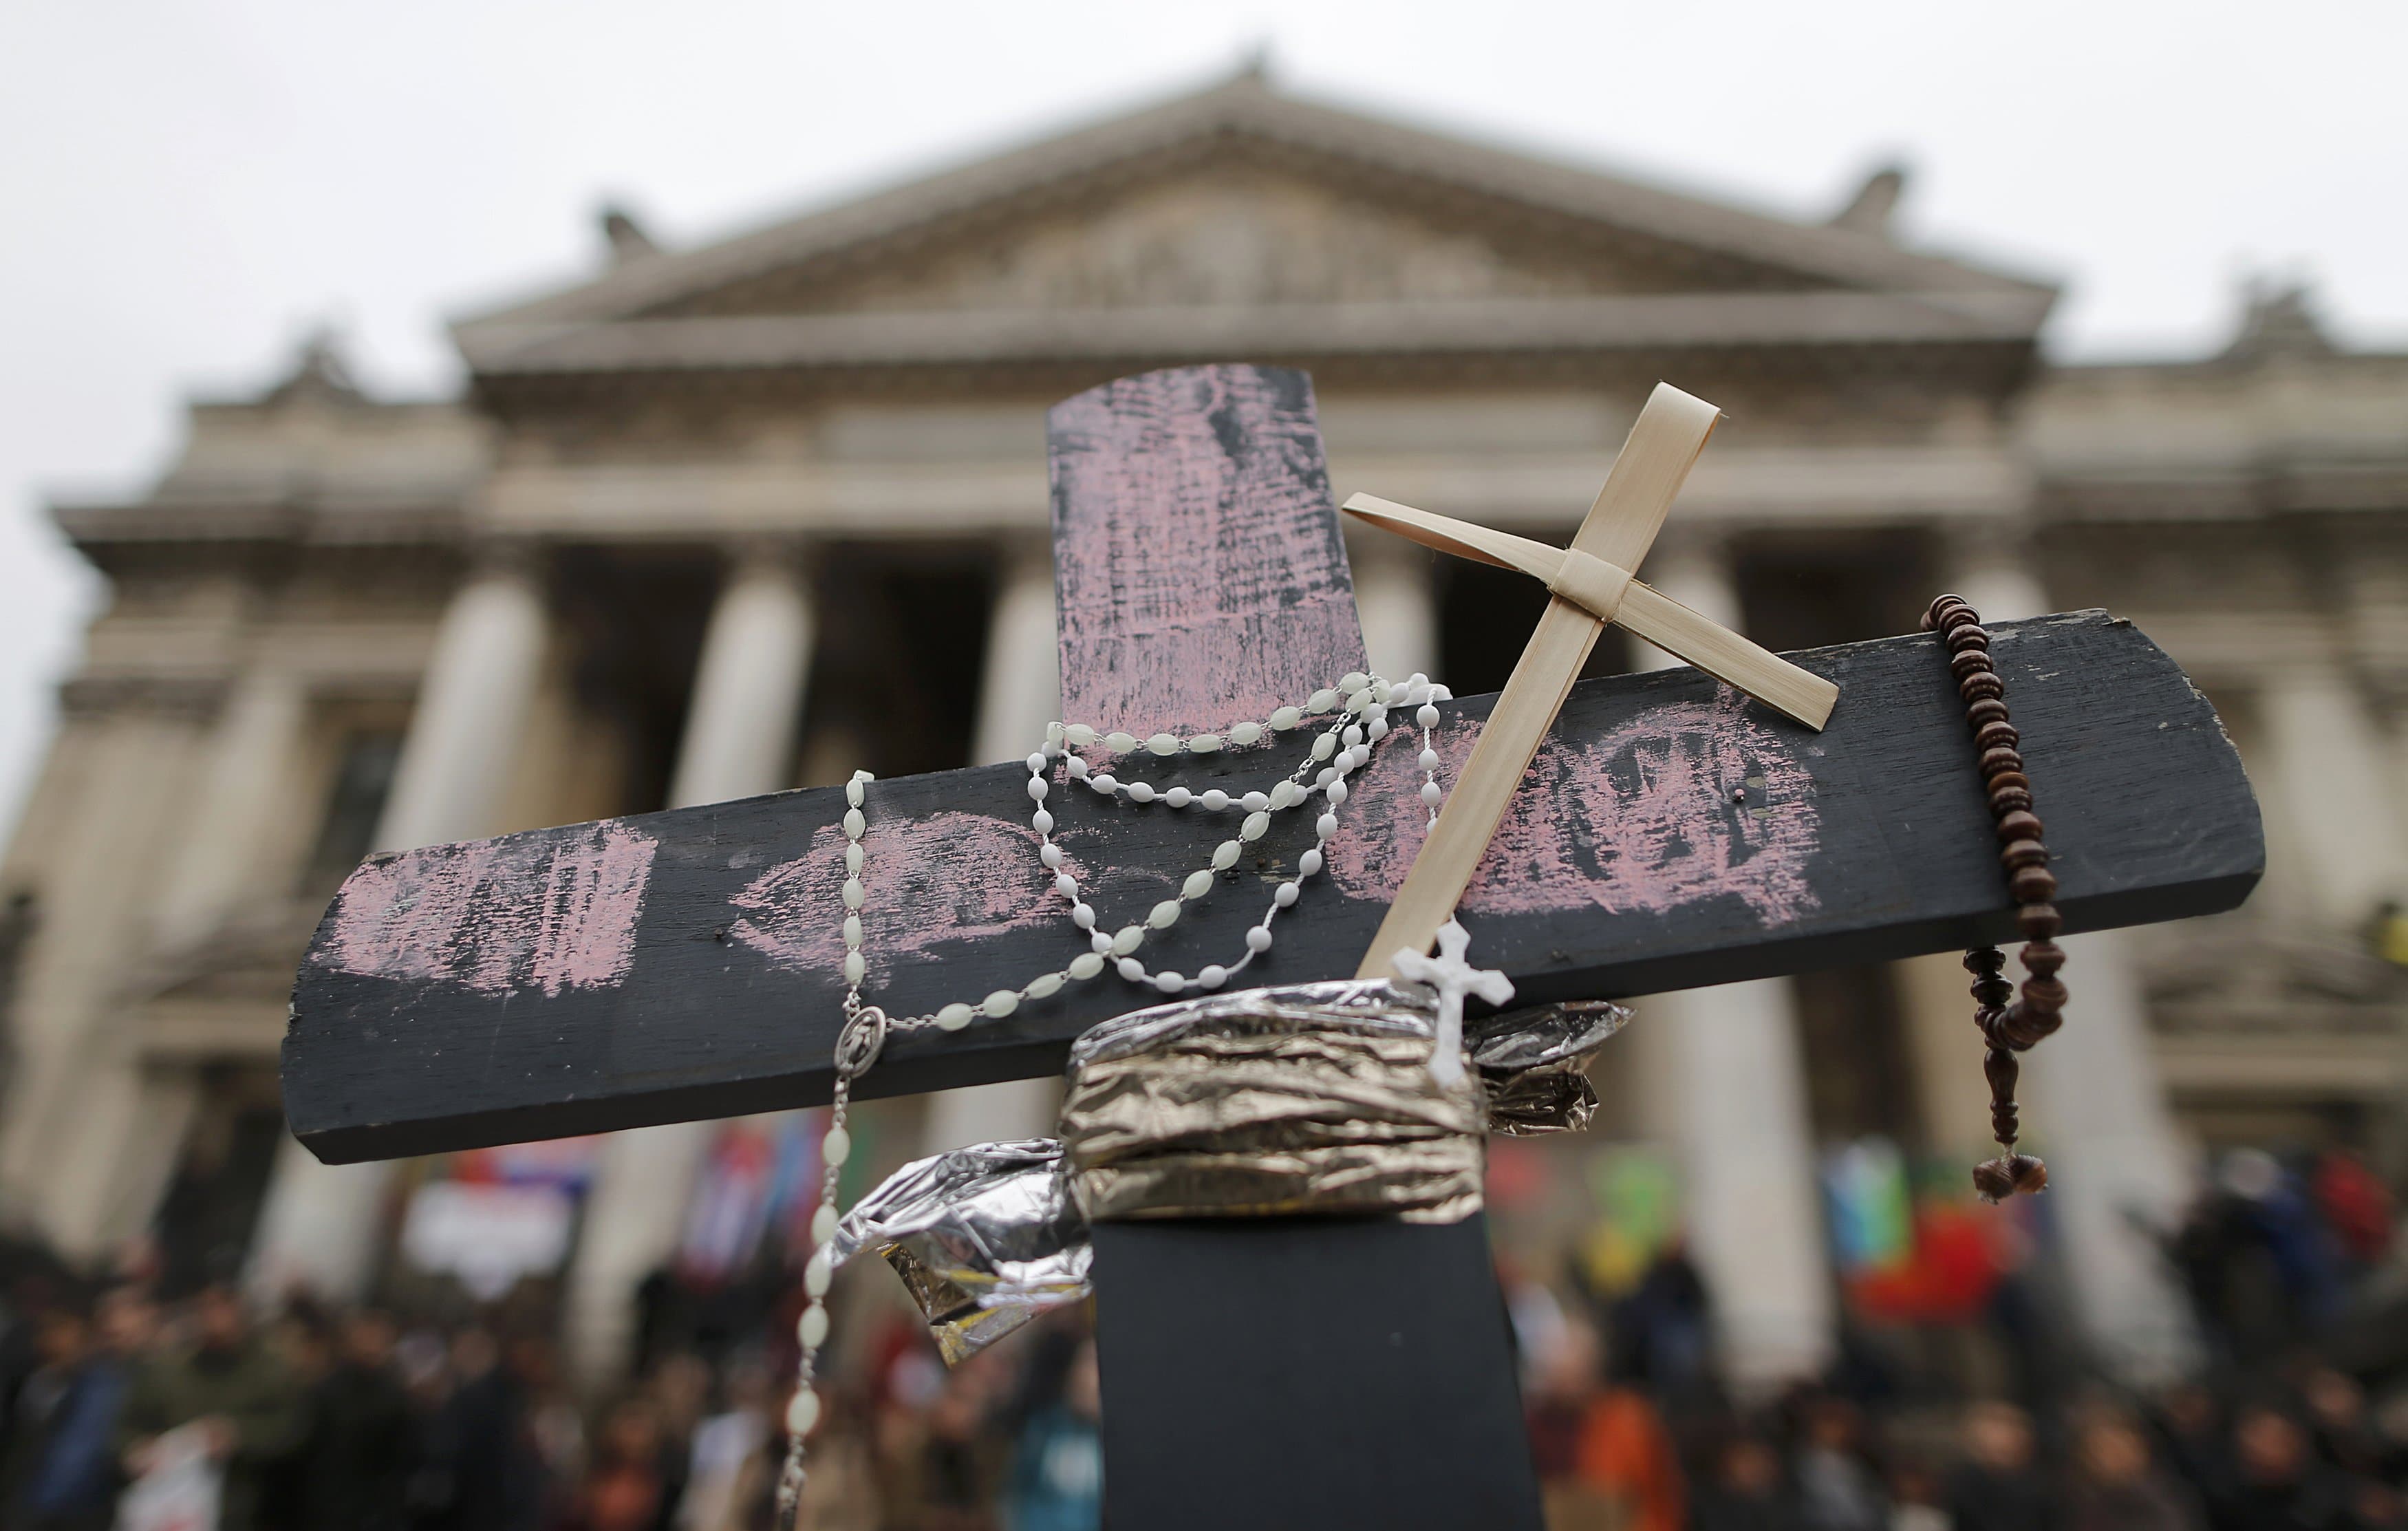 A cross with a rosary and prayer beads is seen at a makeshift memorial following bomb attacks in Brussels. Three nearly simultaneous attacks claimed the lives of dozens and injured more than 200. Photo: CNS/Christian Hartmann, Reuters